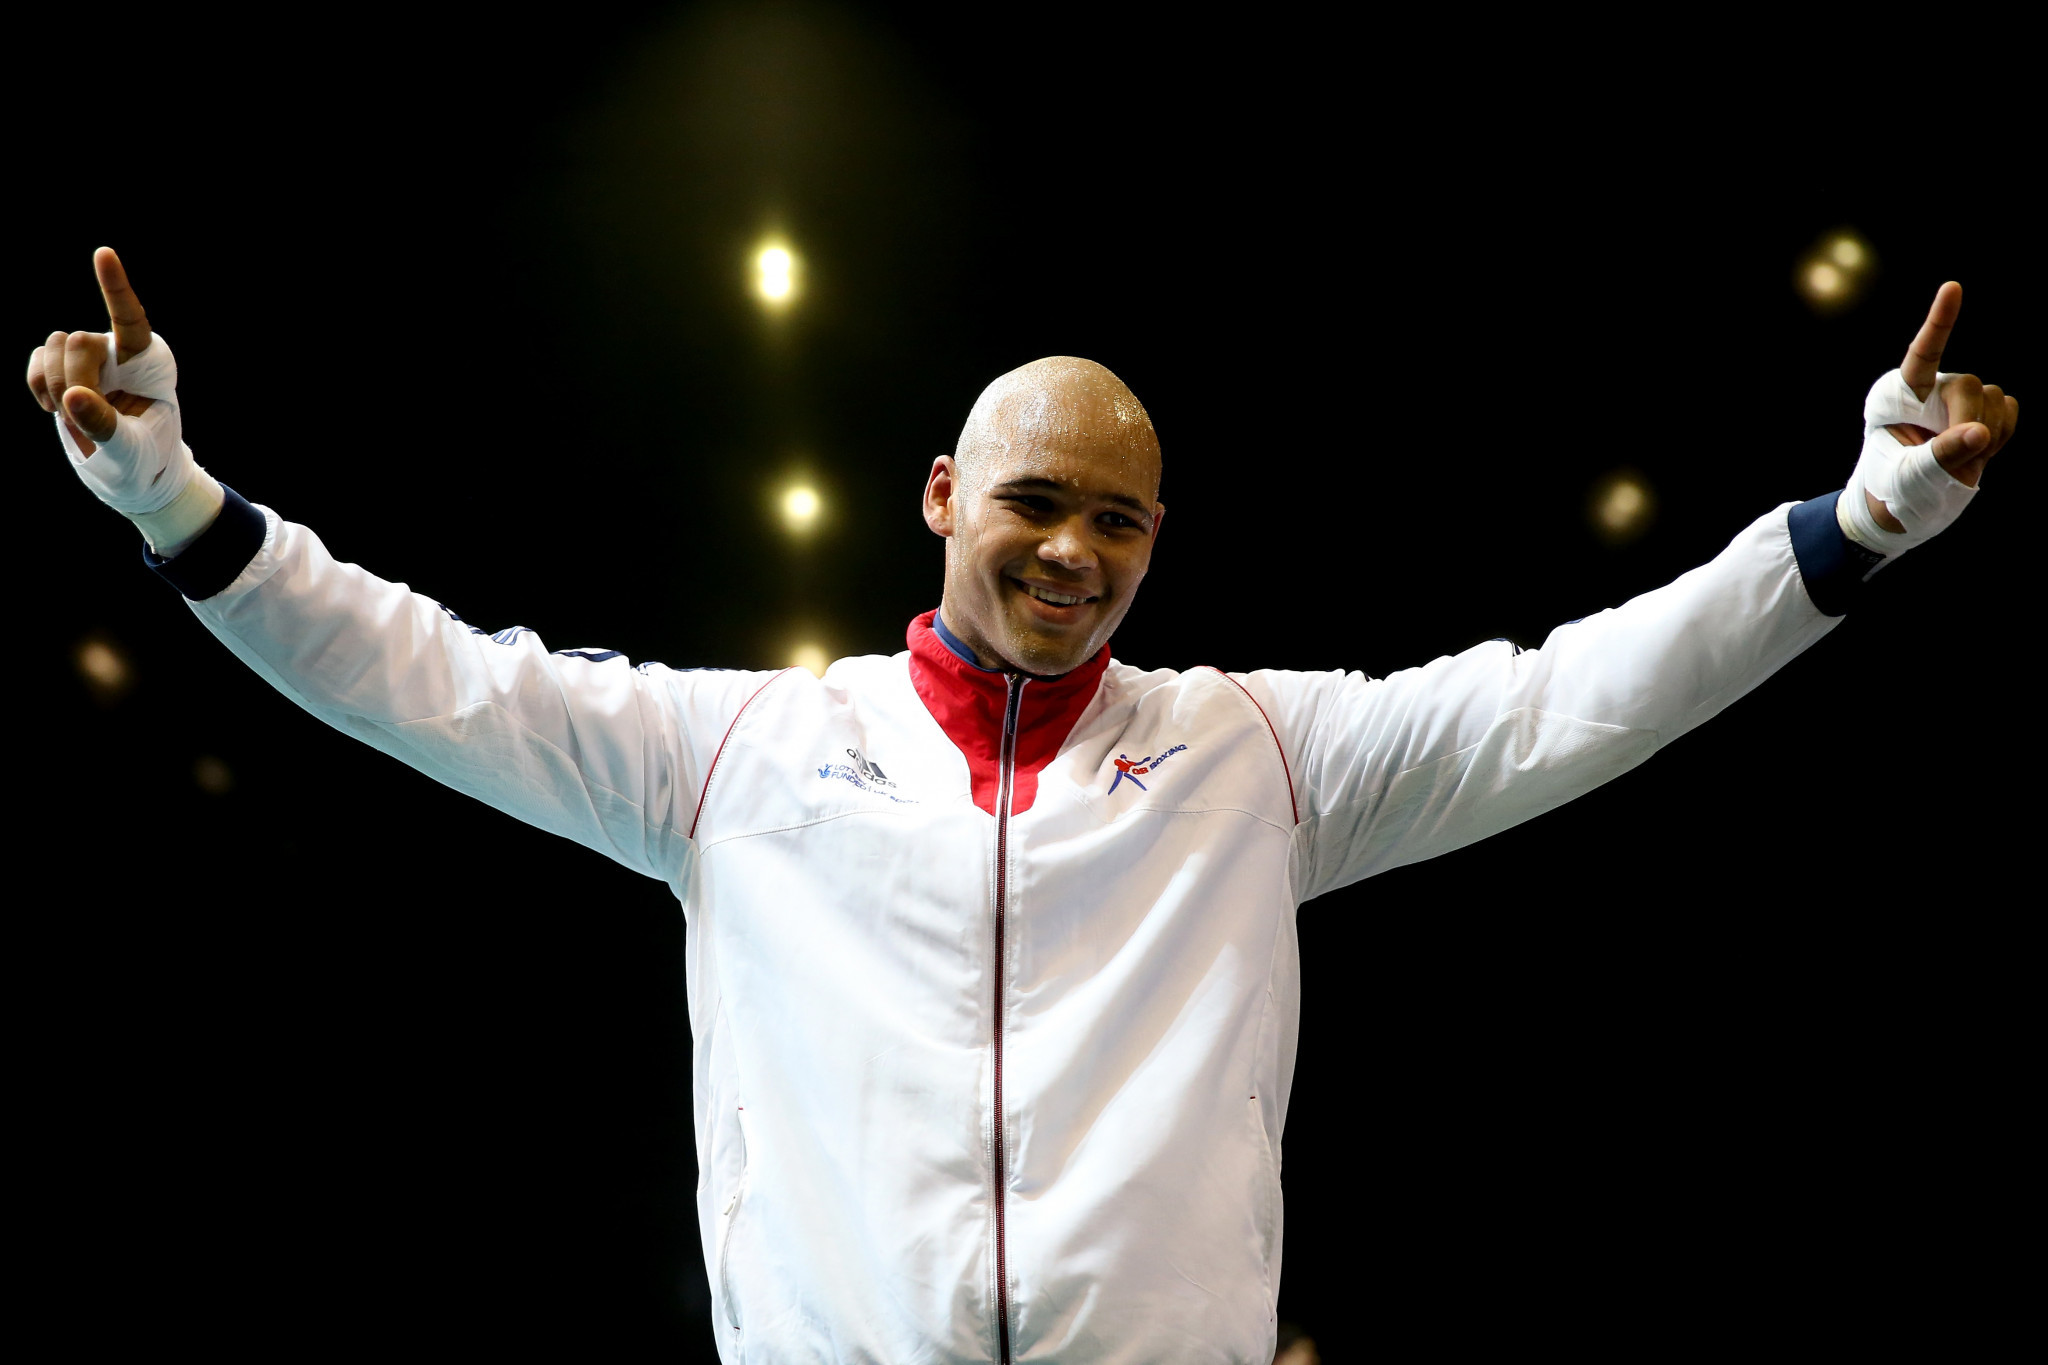 Frazer Clarke is one of England's six male boxers who will compete at Gold Coast 2018 ©Getty Images